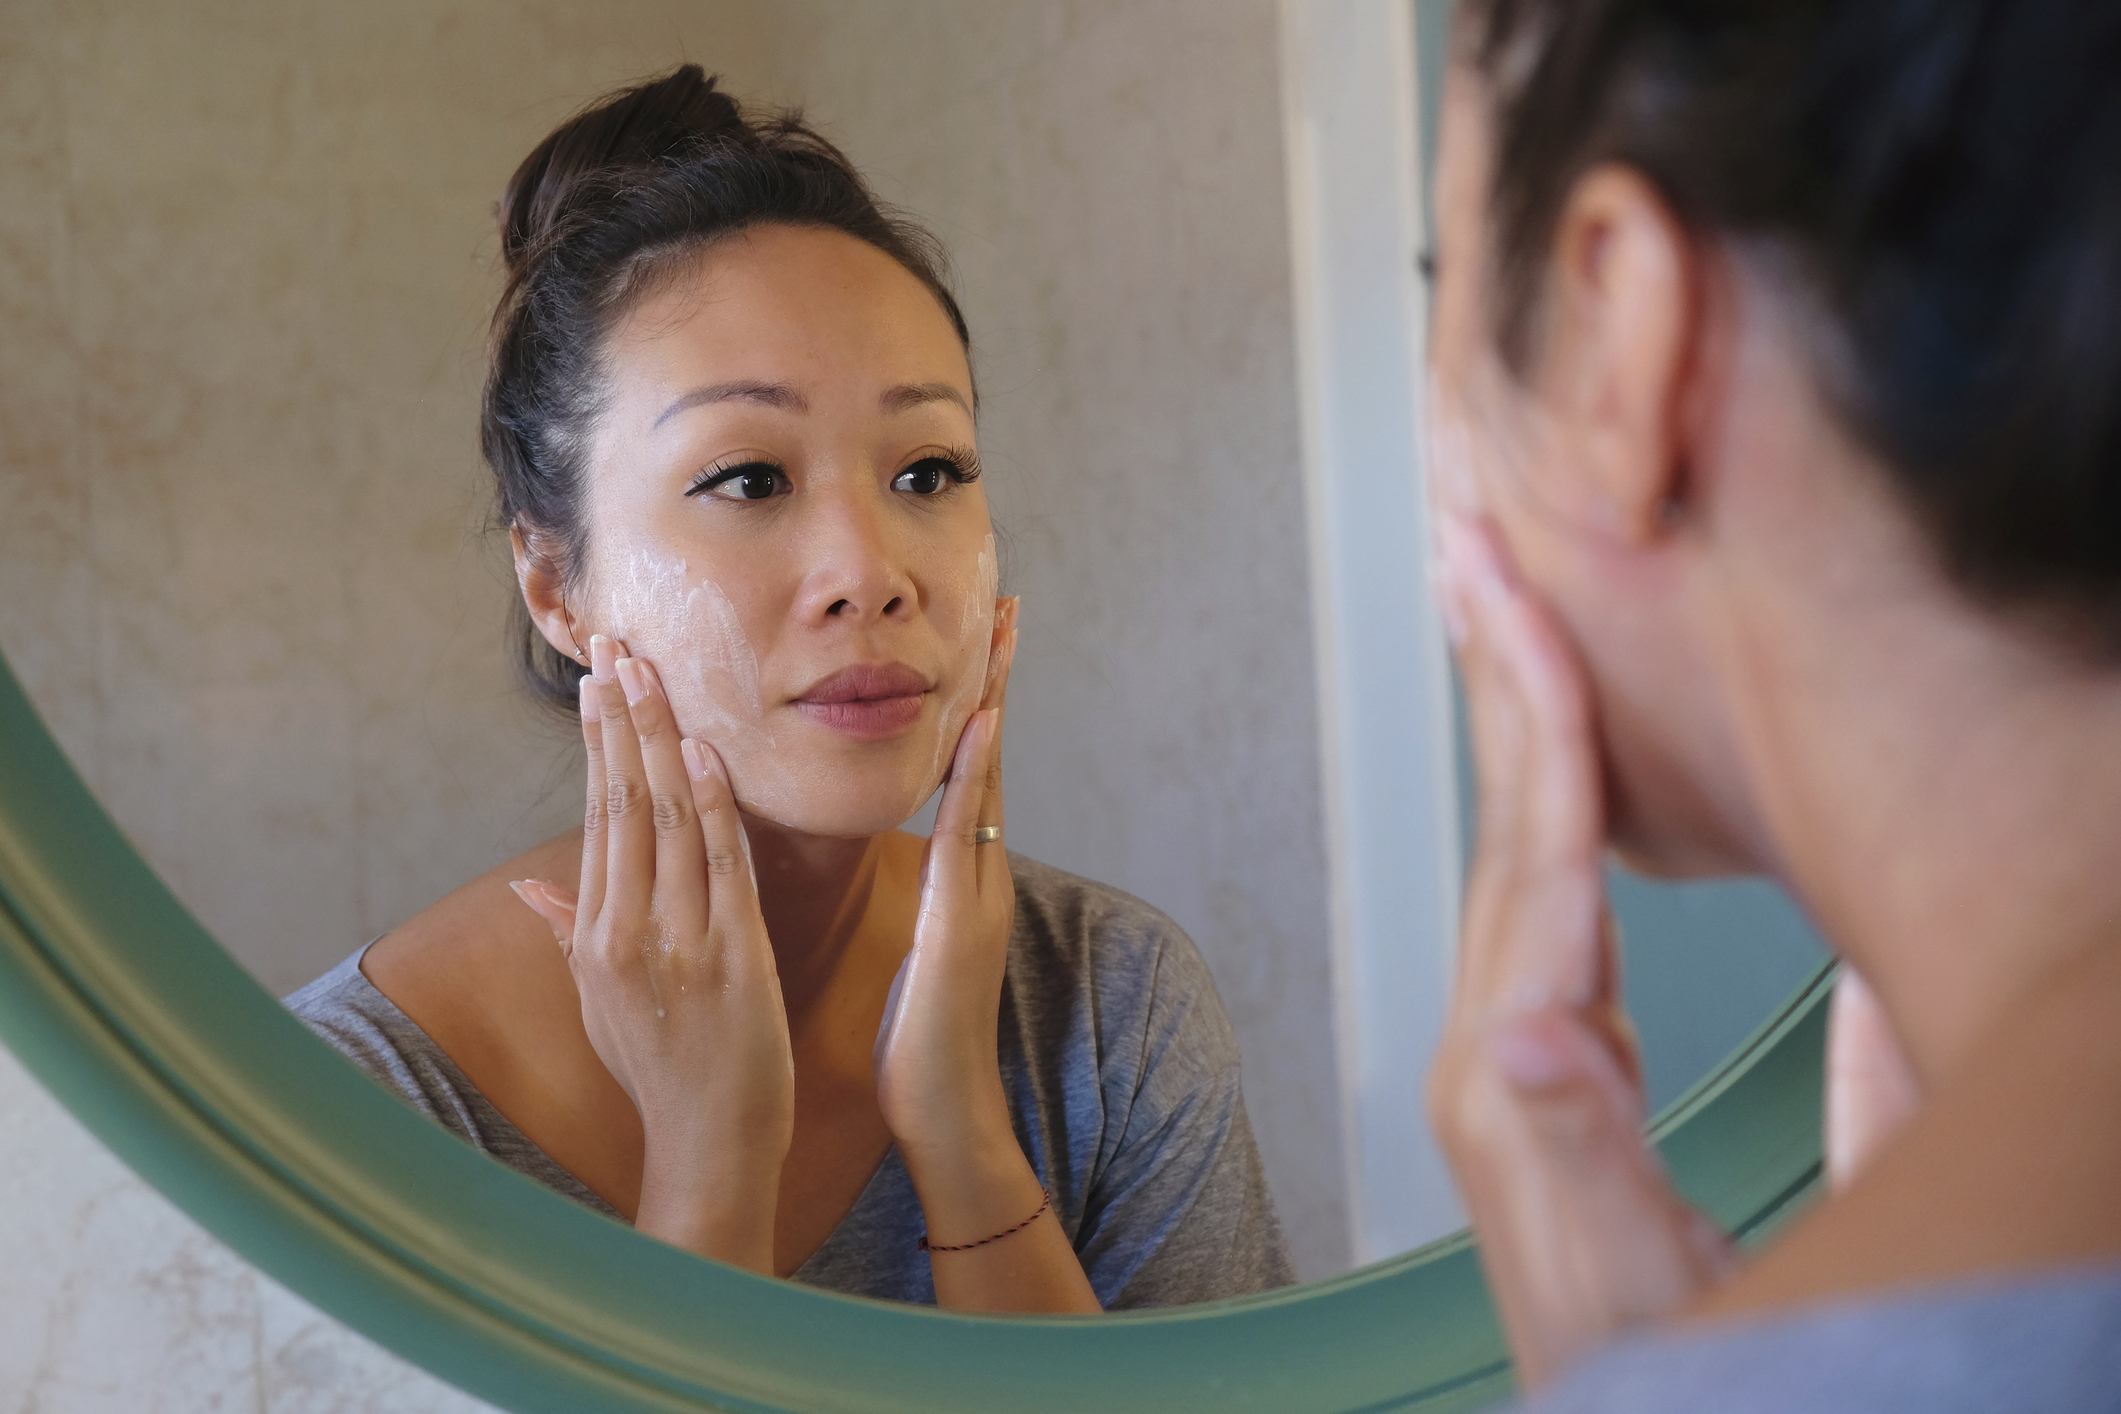 A woman is cleansing her face in front of a mirror, gently massaging her cheeks with both hands